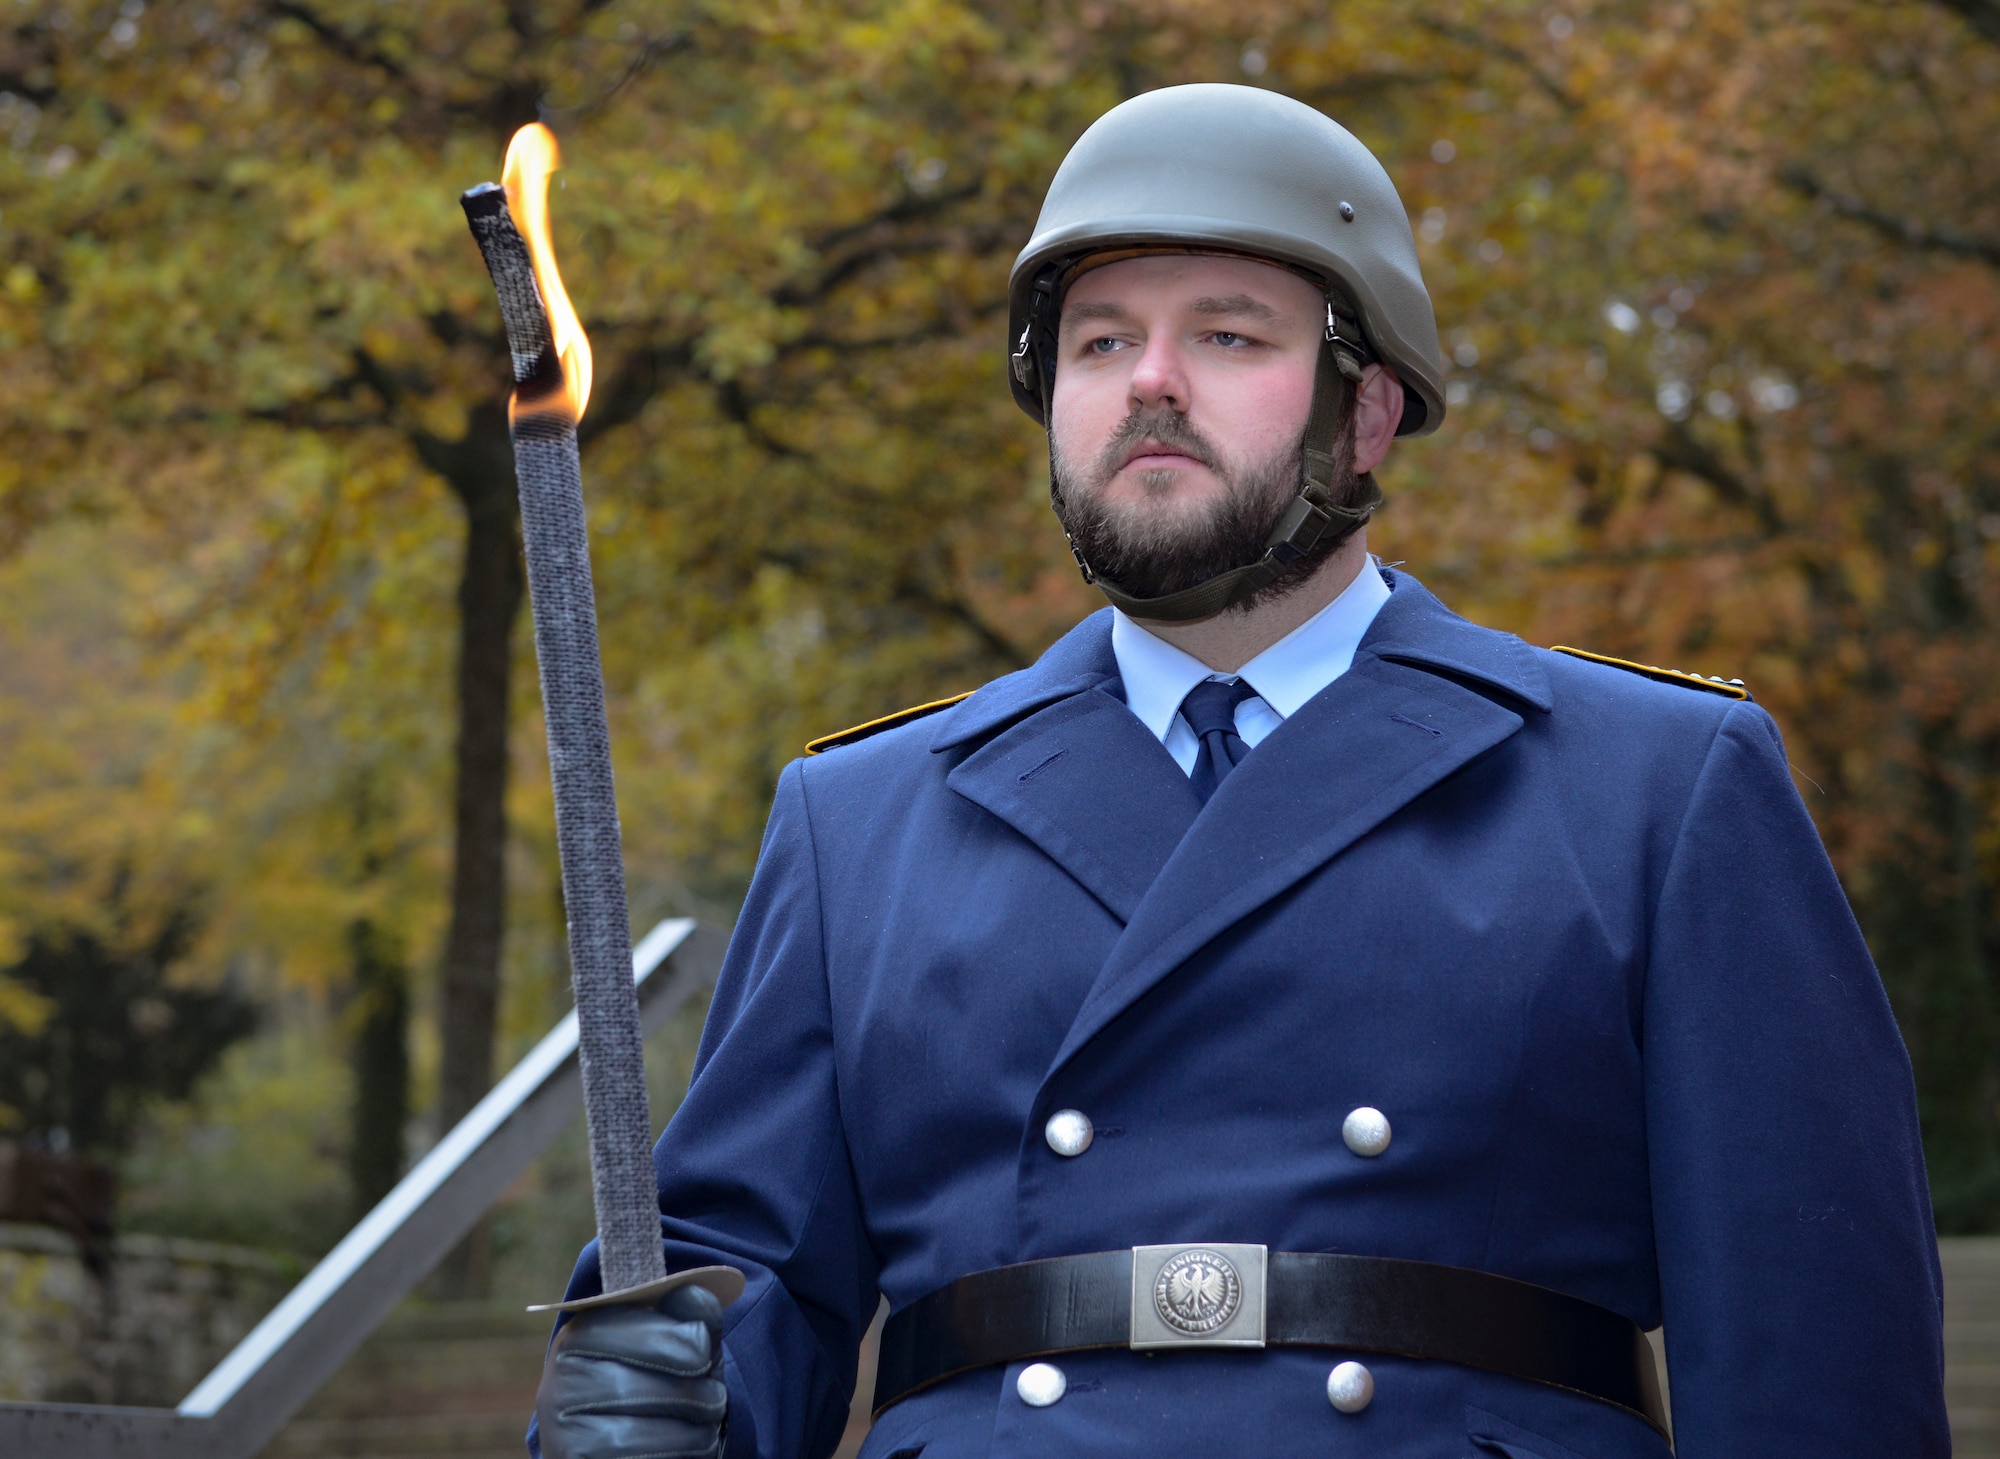 A German military member holds a ceremonial flaming sword during the City of Kaiserslautern’s National Day of Mourning Ceremony, Kaiserslautern, Germany, Nov. 17, 2019. The National Day of Mourning (Volkstrauertag) is an annual German occasion to remember all victims of war and tyranny. It was established in 1922 and was initially dedicated to the victims of World War I. As with the Sunday of the Dead (Totensonntag), the National Day of Mourning is a “silent day,” which means that in some regions of Germany music and dance events are prohibited.